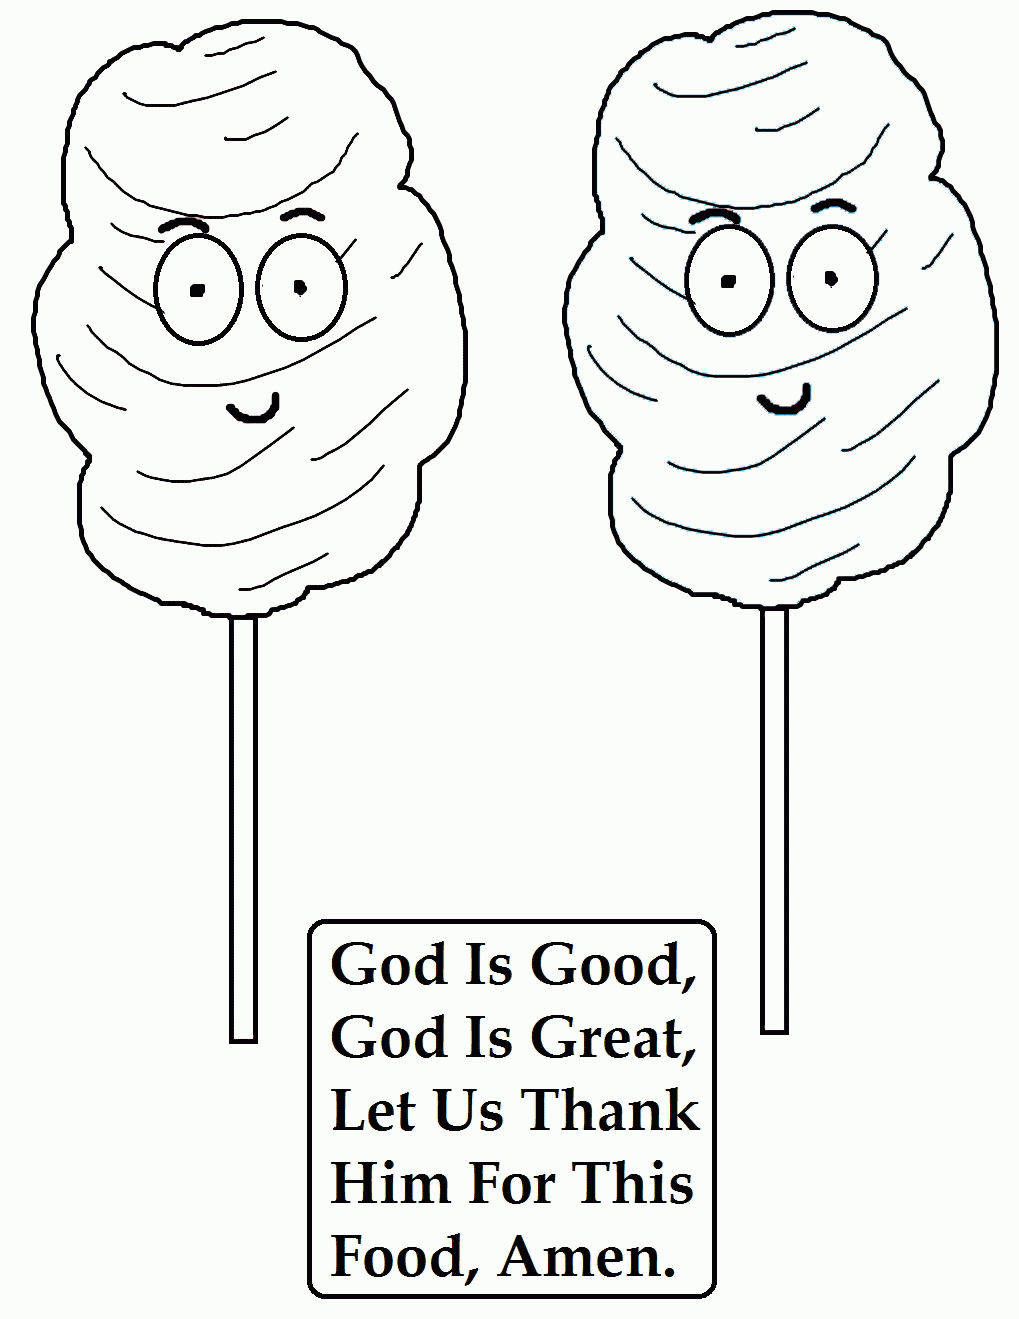 Cotton Candy Coloring Page